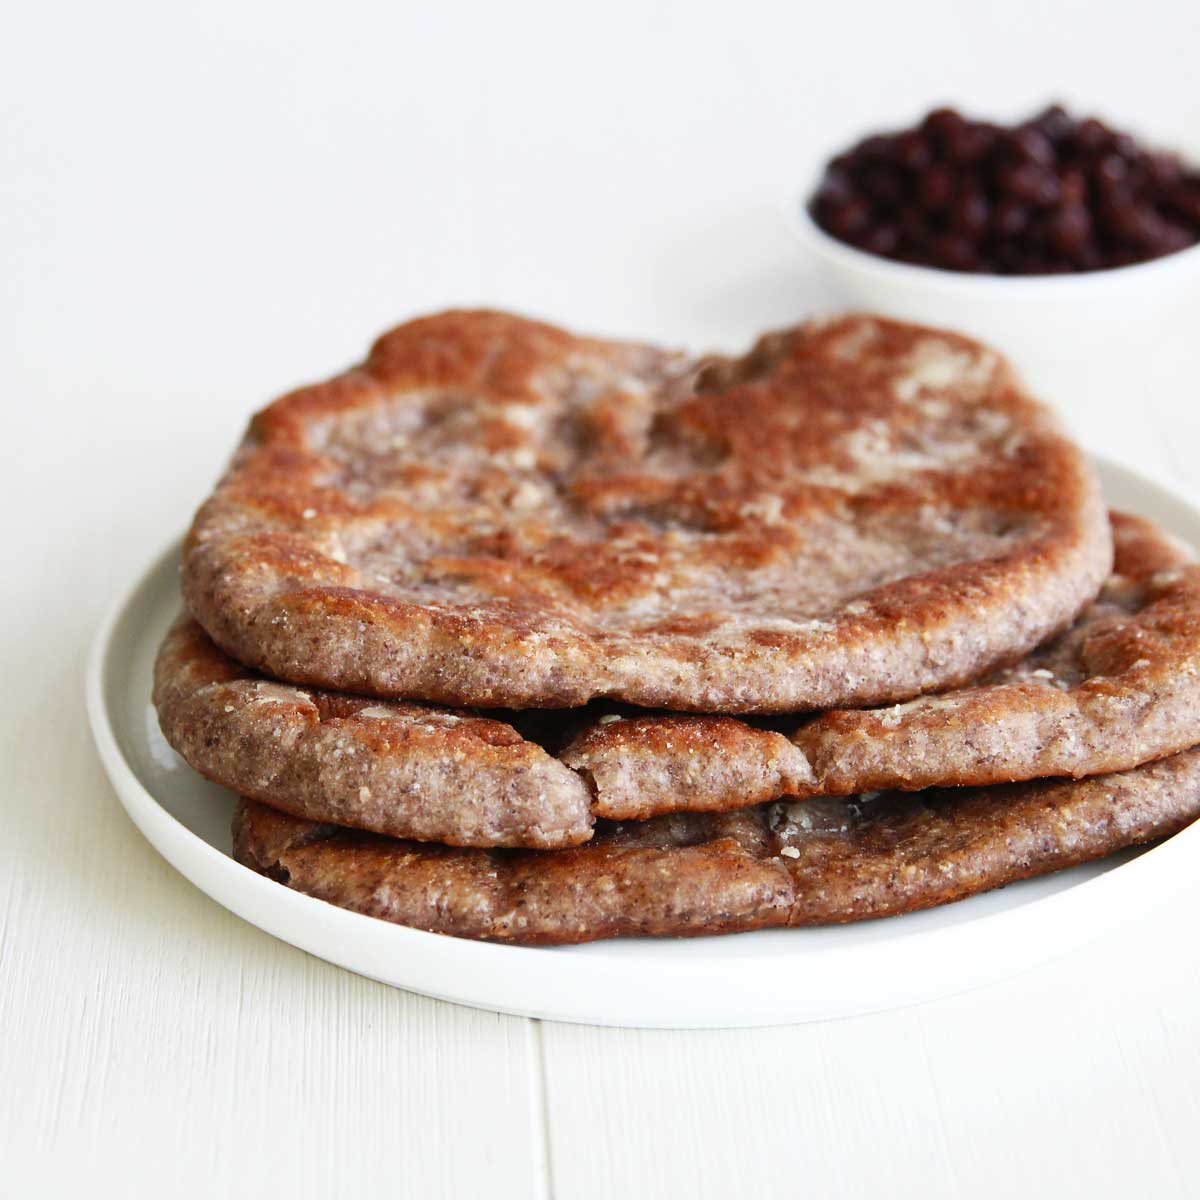 Black Bean Naan (Lower Carb Flatbread Made with Canned Black Beans) - Ricotta Cinnamon Rolls